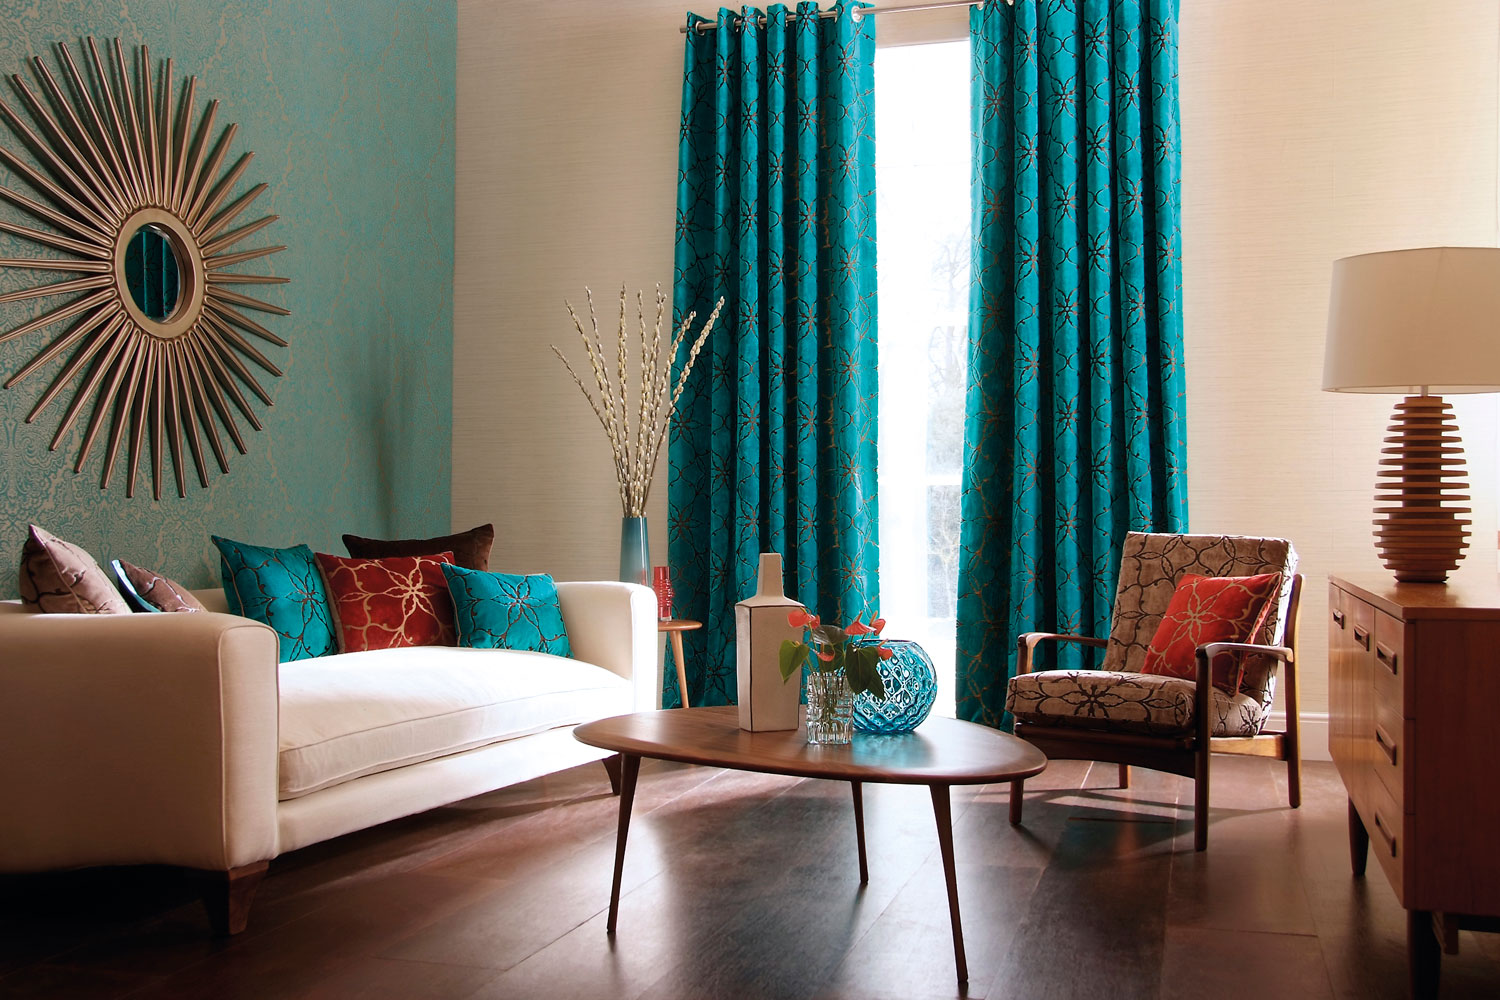 Hardwood flooring inside a bright blue and brown themed living area fused with a white sofa with colorful throw pillows